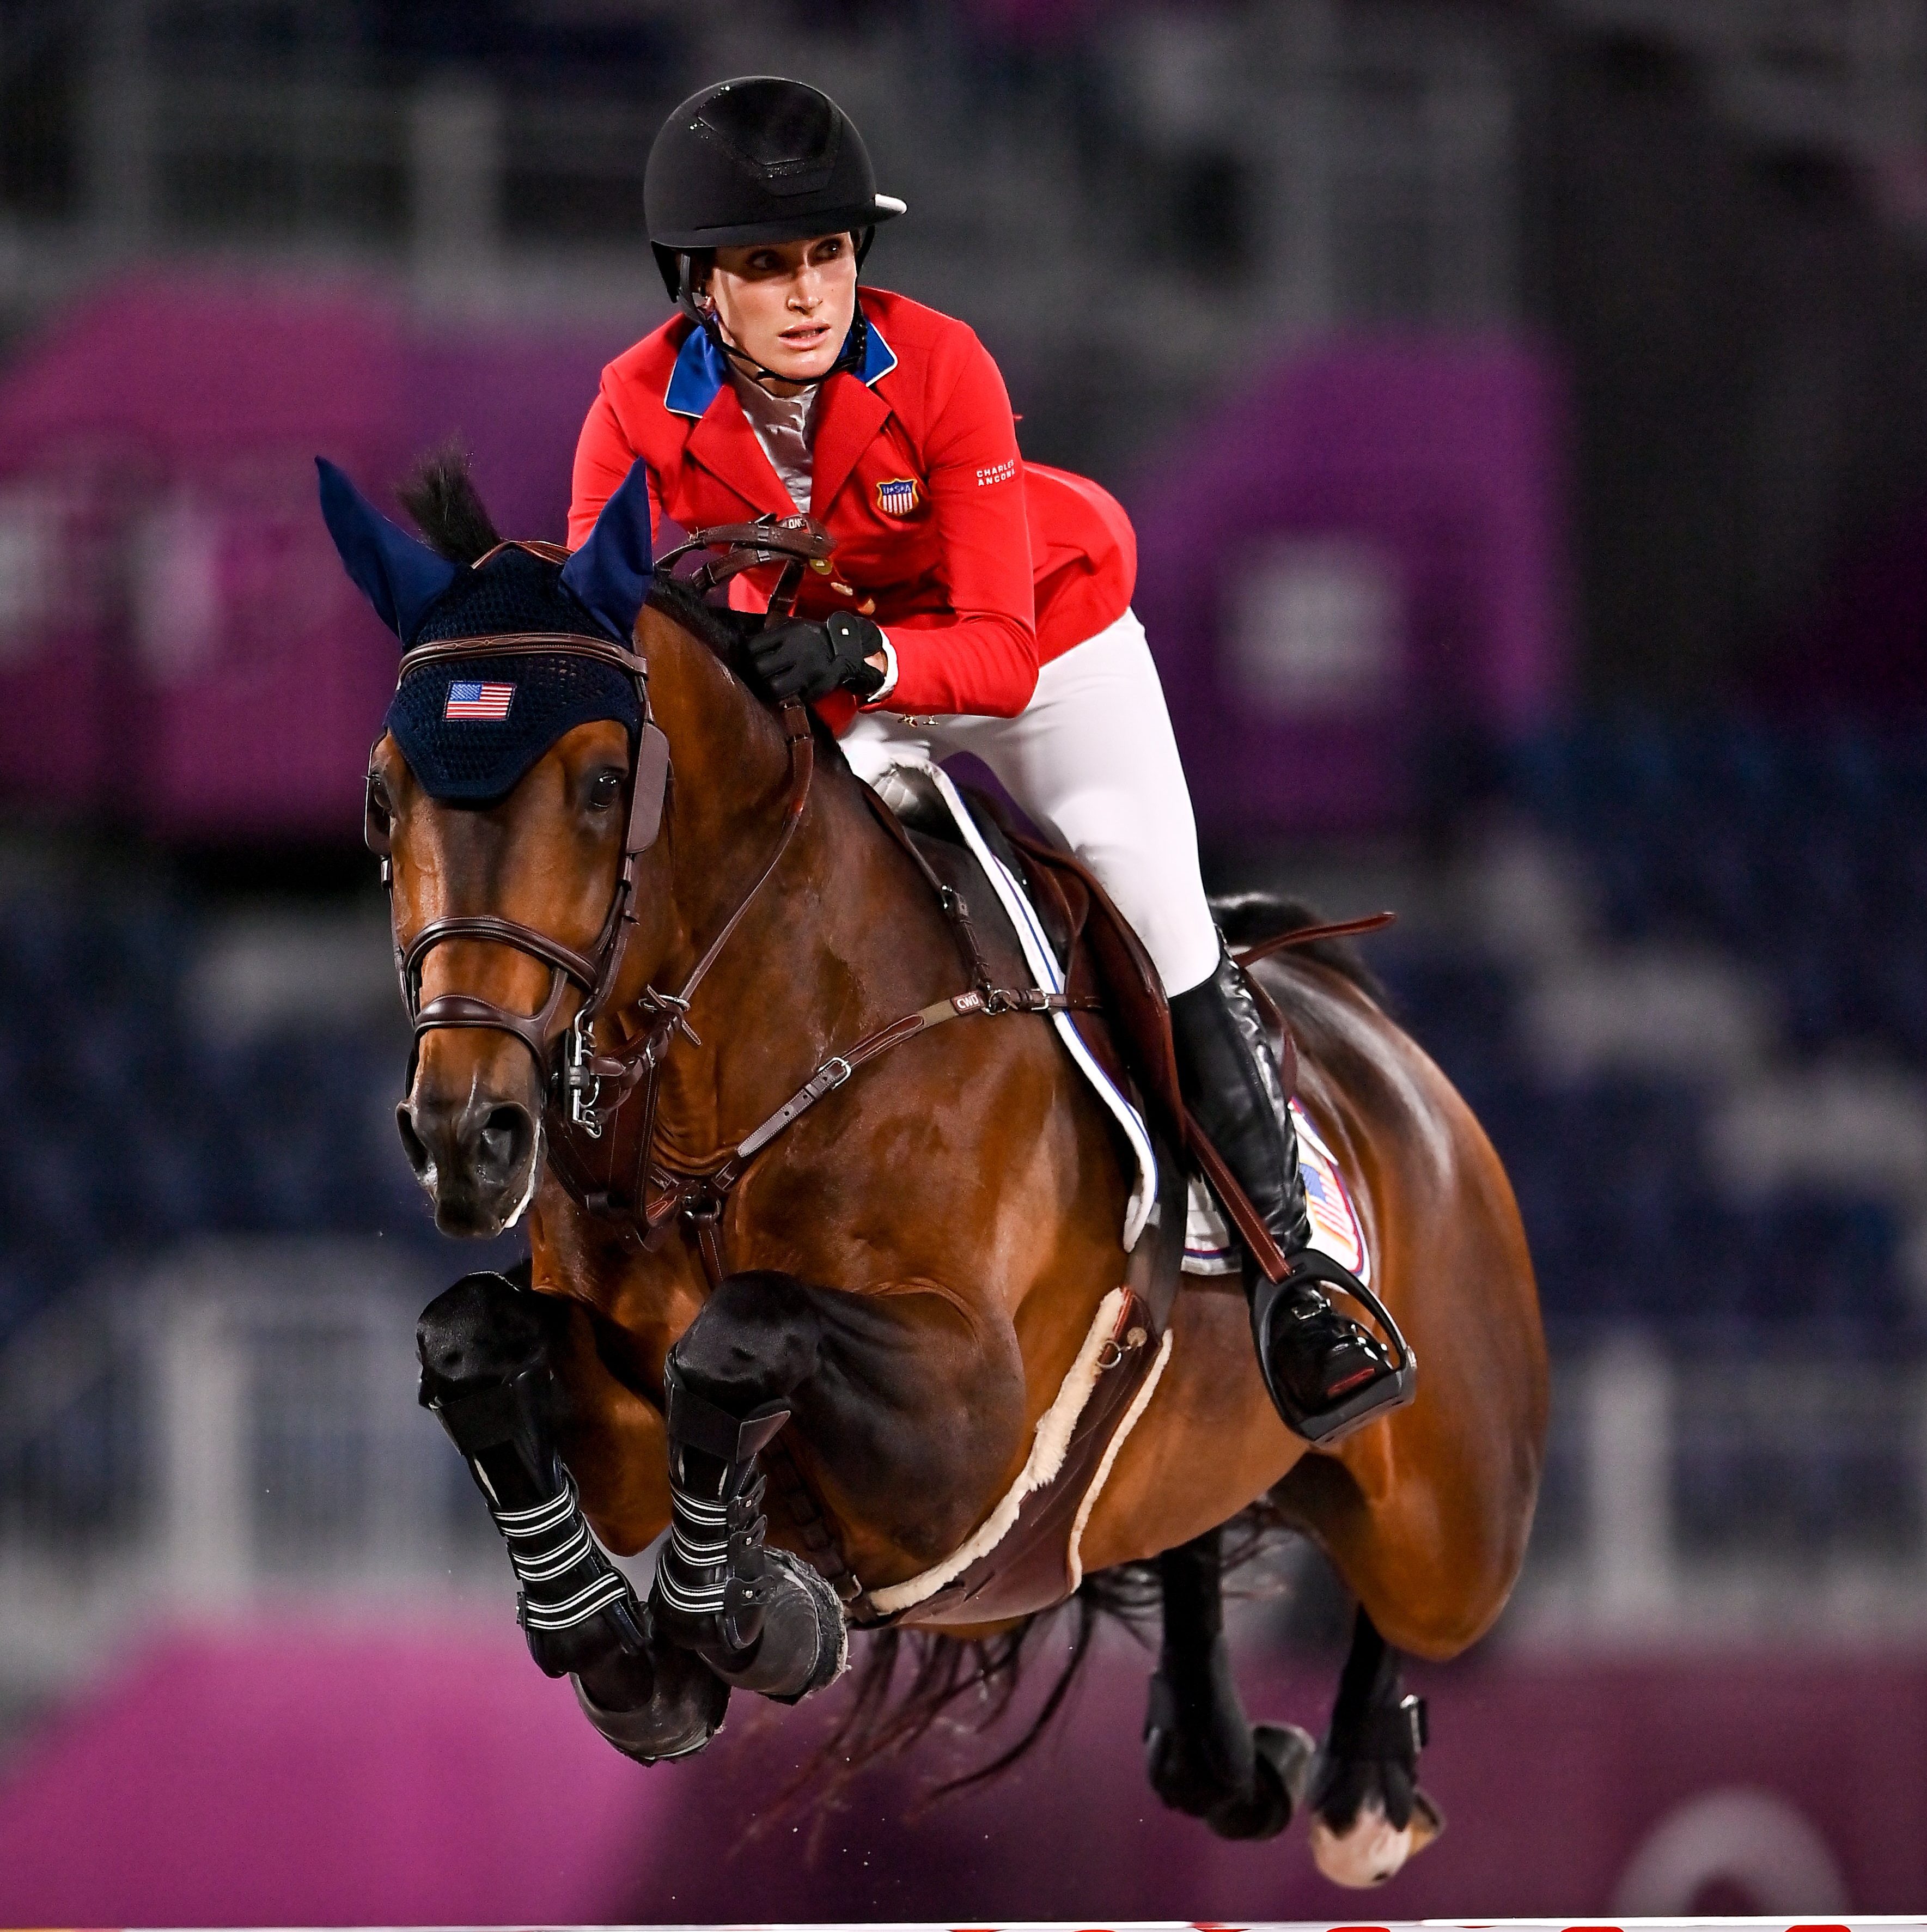 Is Jessica Springsteen, equestrian star and Bruce's daughter, competing at the 2024 Olympics?